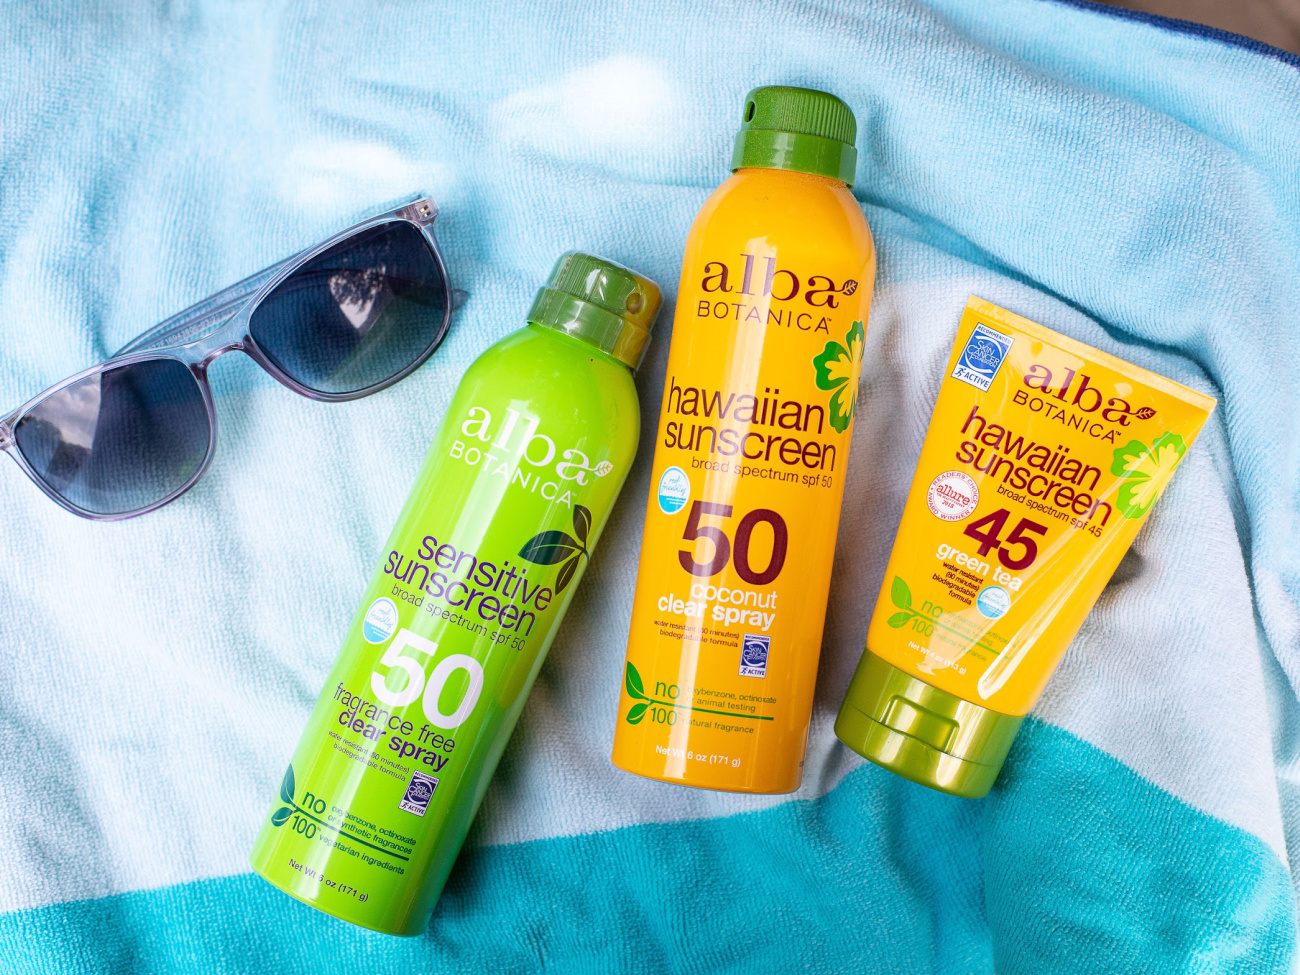 Stock Up On Fantastic Sunscreen And Save – Alba Botanica Is On Sale Now At Publix